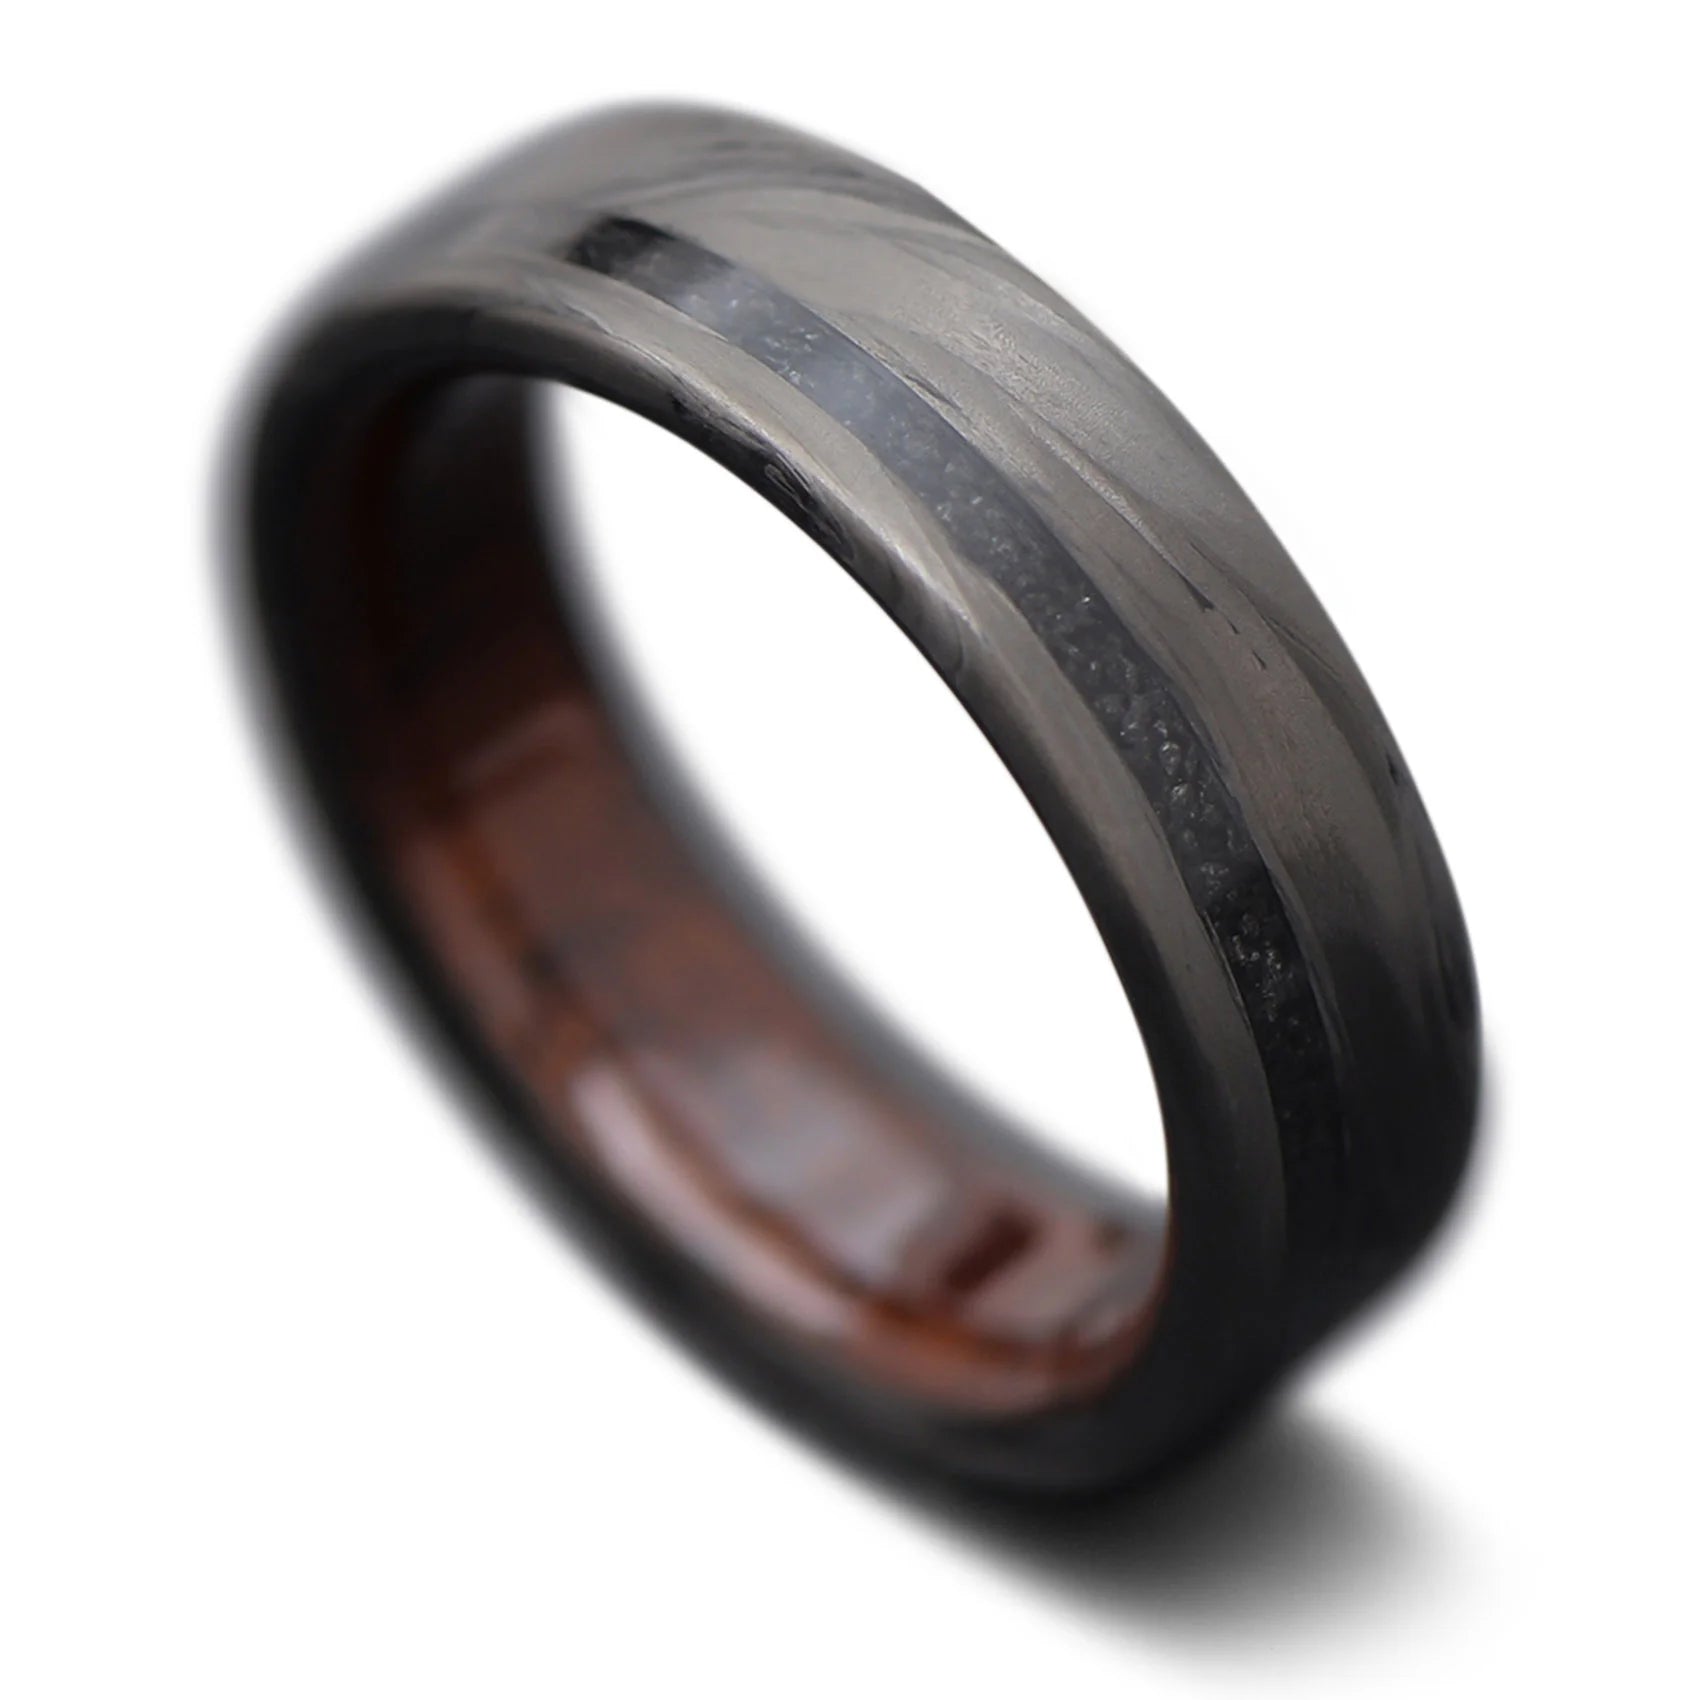 Modern wedding ring with carbon fiber and black Onyx stone